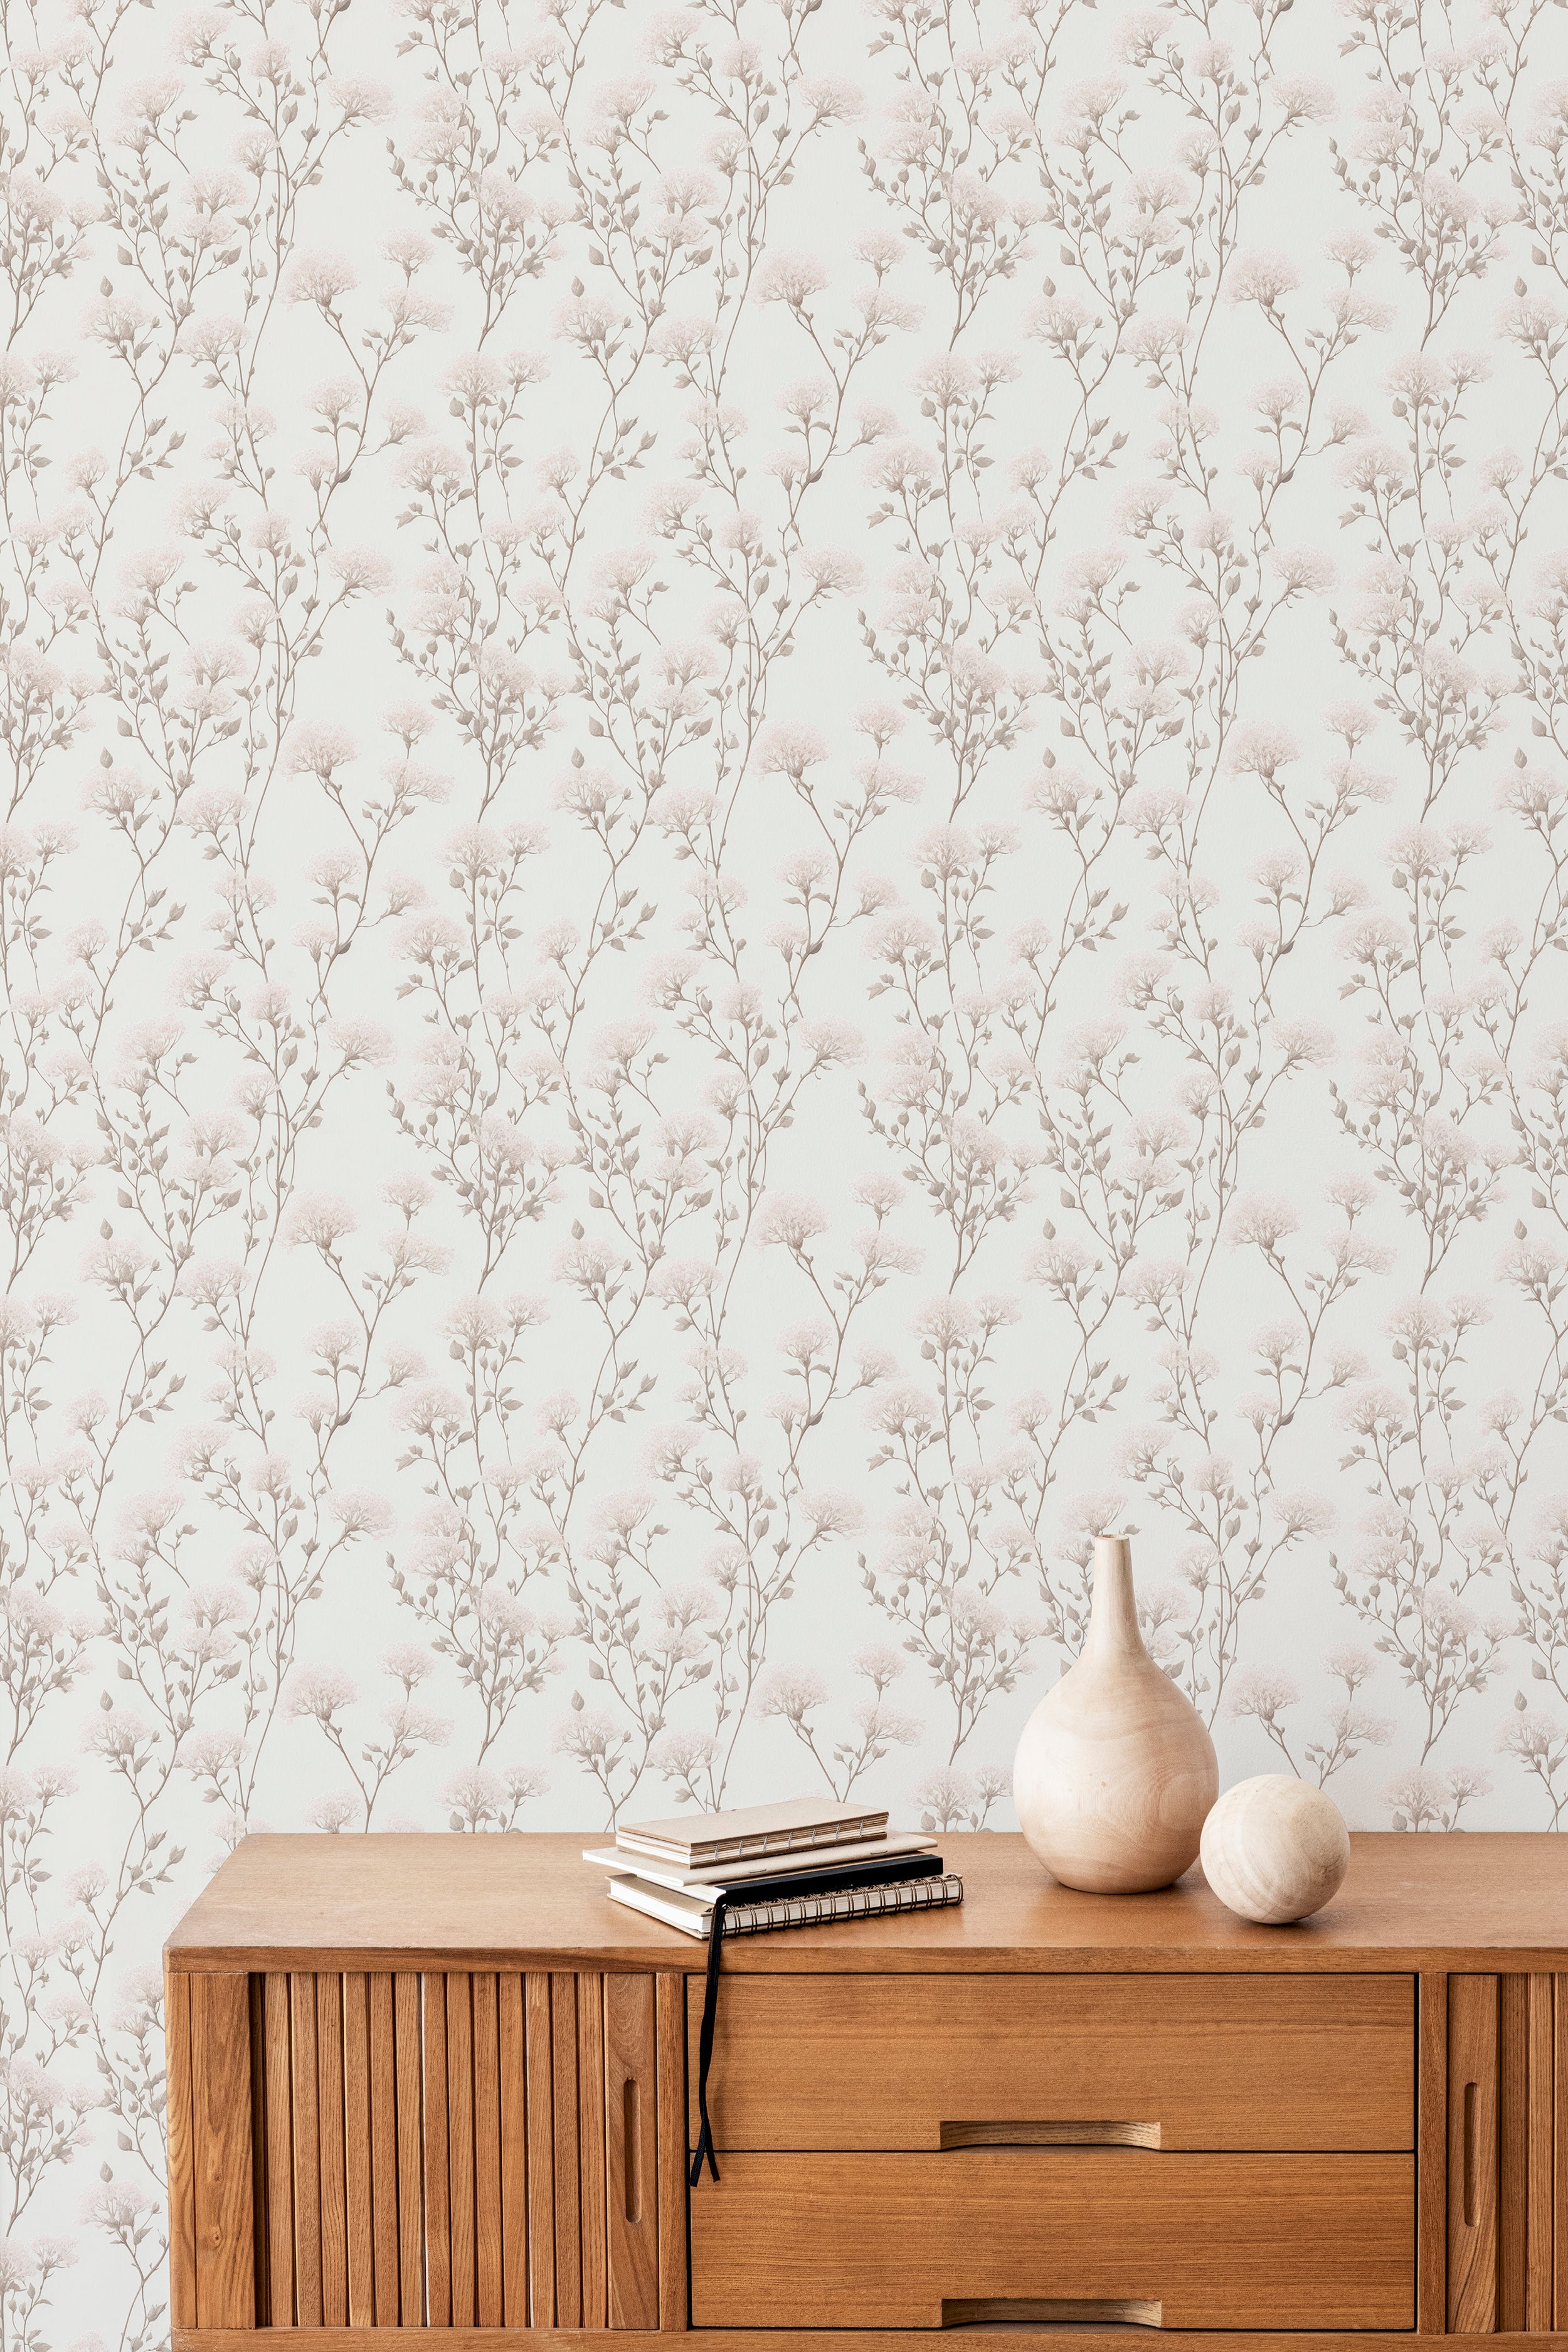 An elegant interior wall featuring the Vintage Floral Reverie Wallpaper, with intricate branches and delicate floral patterns in shades of muted pink and gray, creating a timeless, sophisticated look.